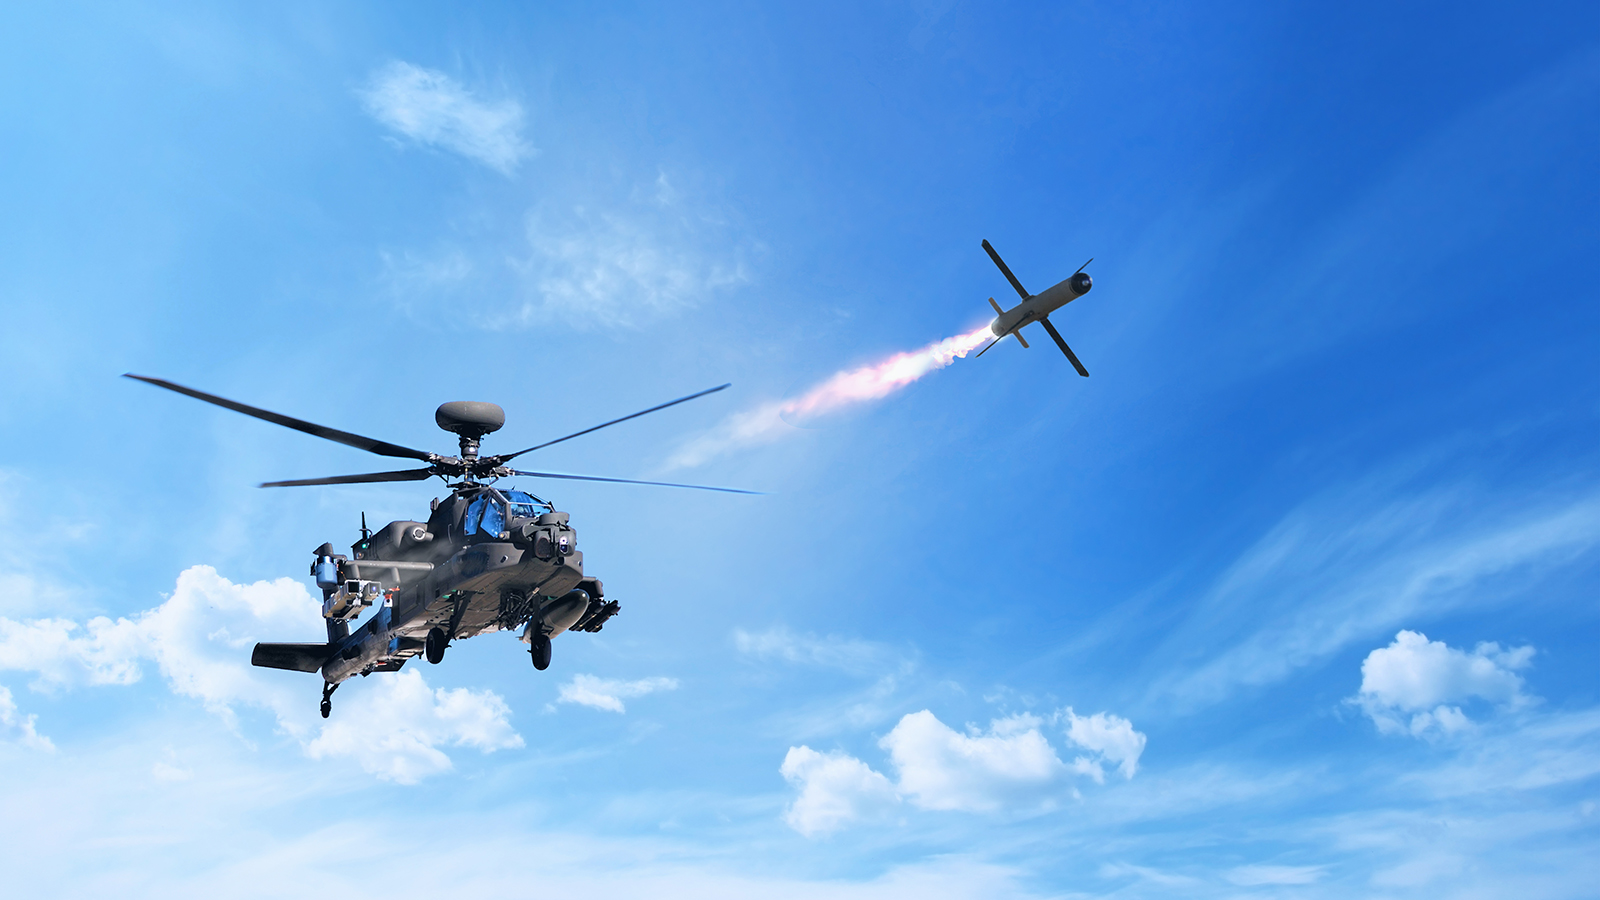 Rafael Submits Spike Missile for US Army Copter Munition Competition